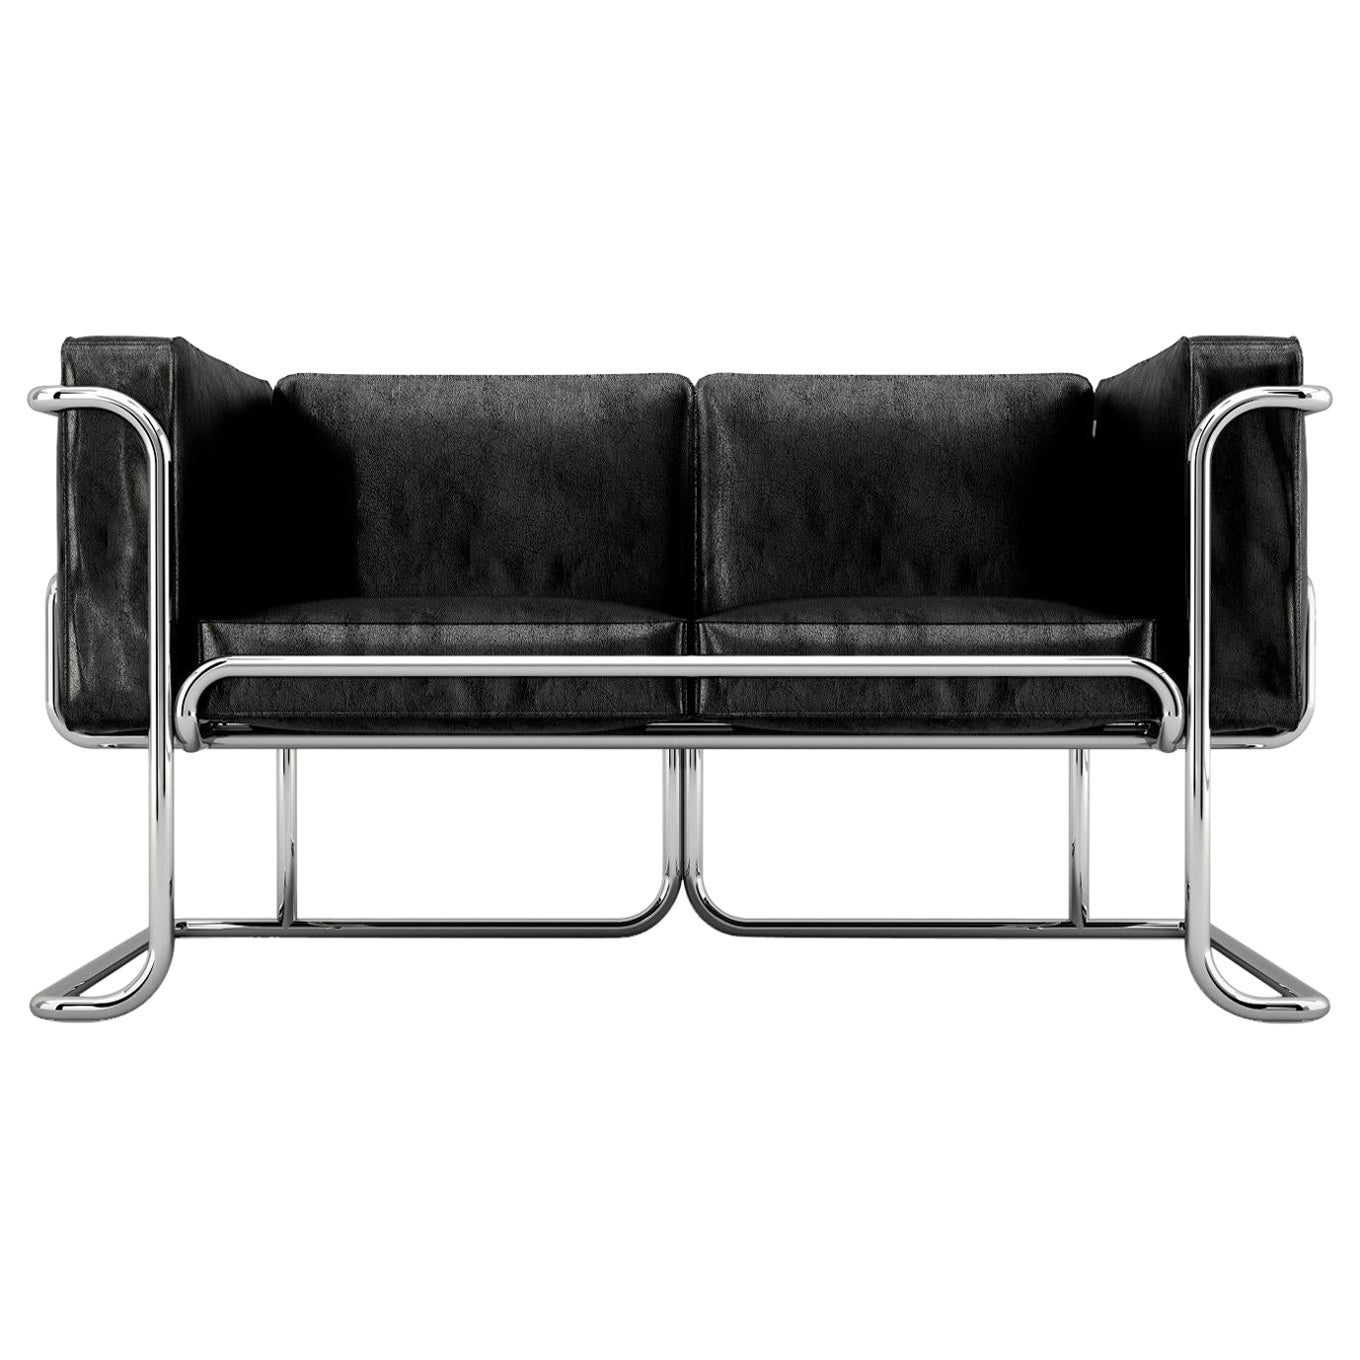 Lotus 2 Seat Sofa - Modern Black Leather Sofa with Stainless Steel Legs